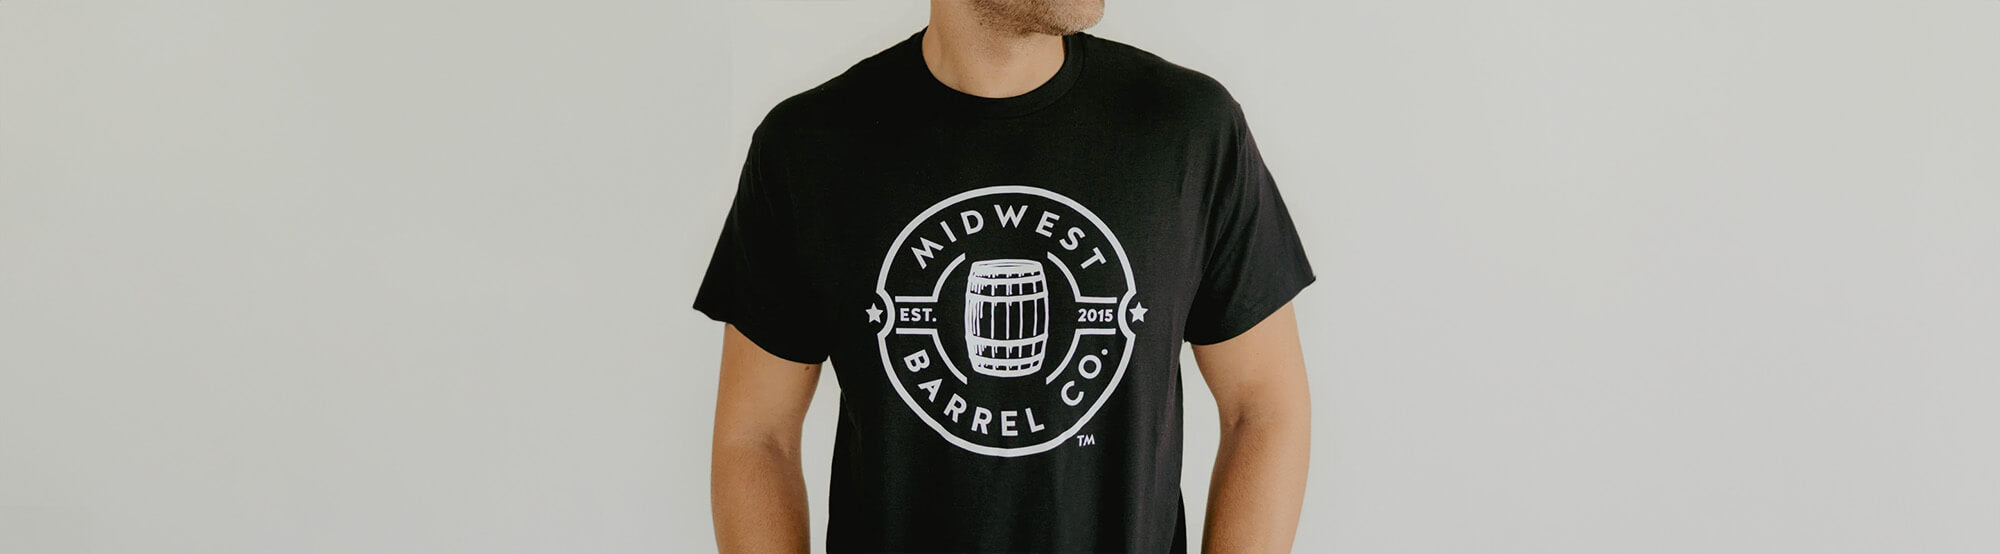 Man wearing black shirt with white Midwest Barrel Co. circle logo with Est. 2015 around a bourbon barrel in the middle of the circle